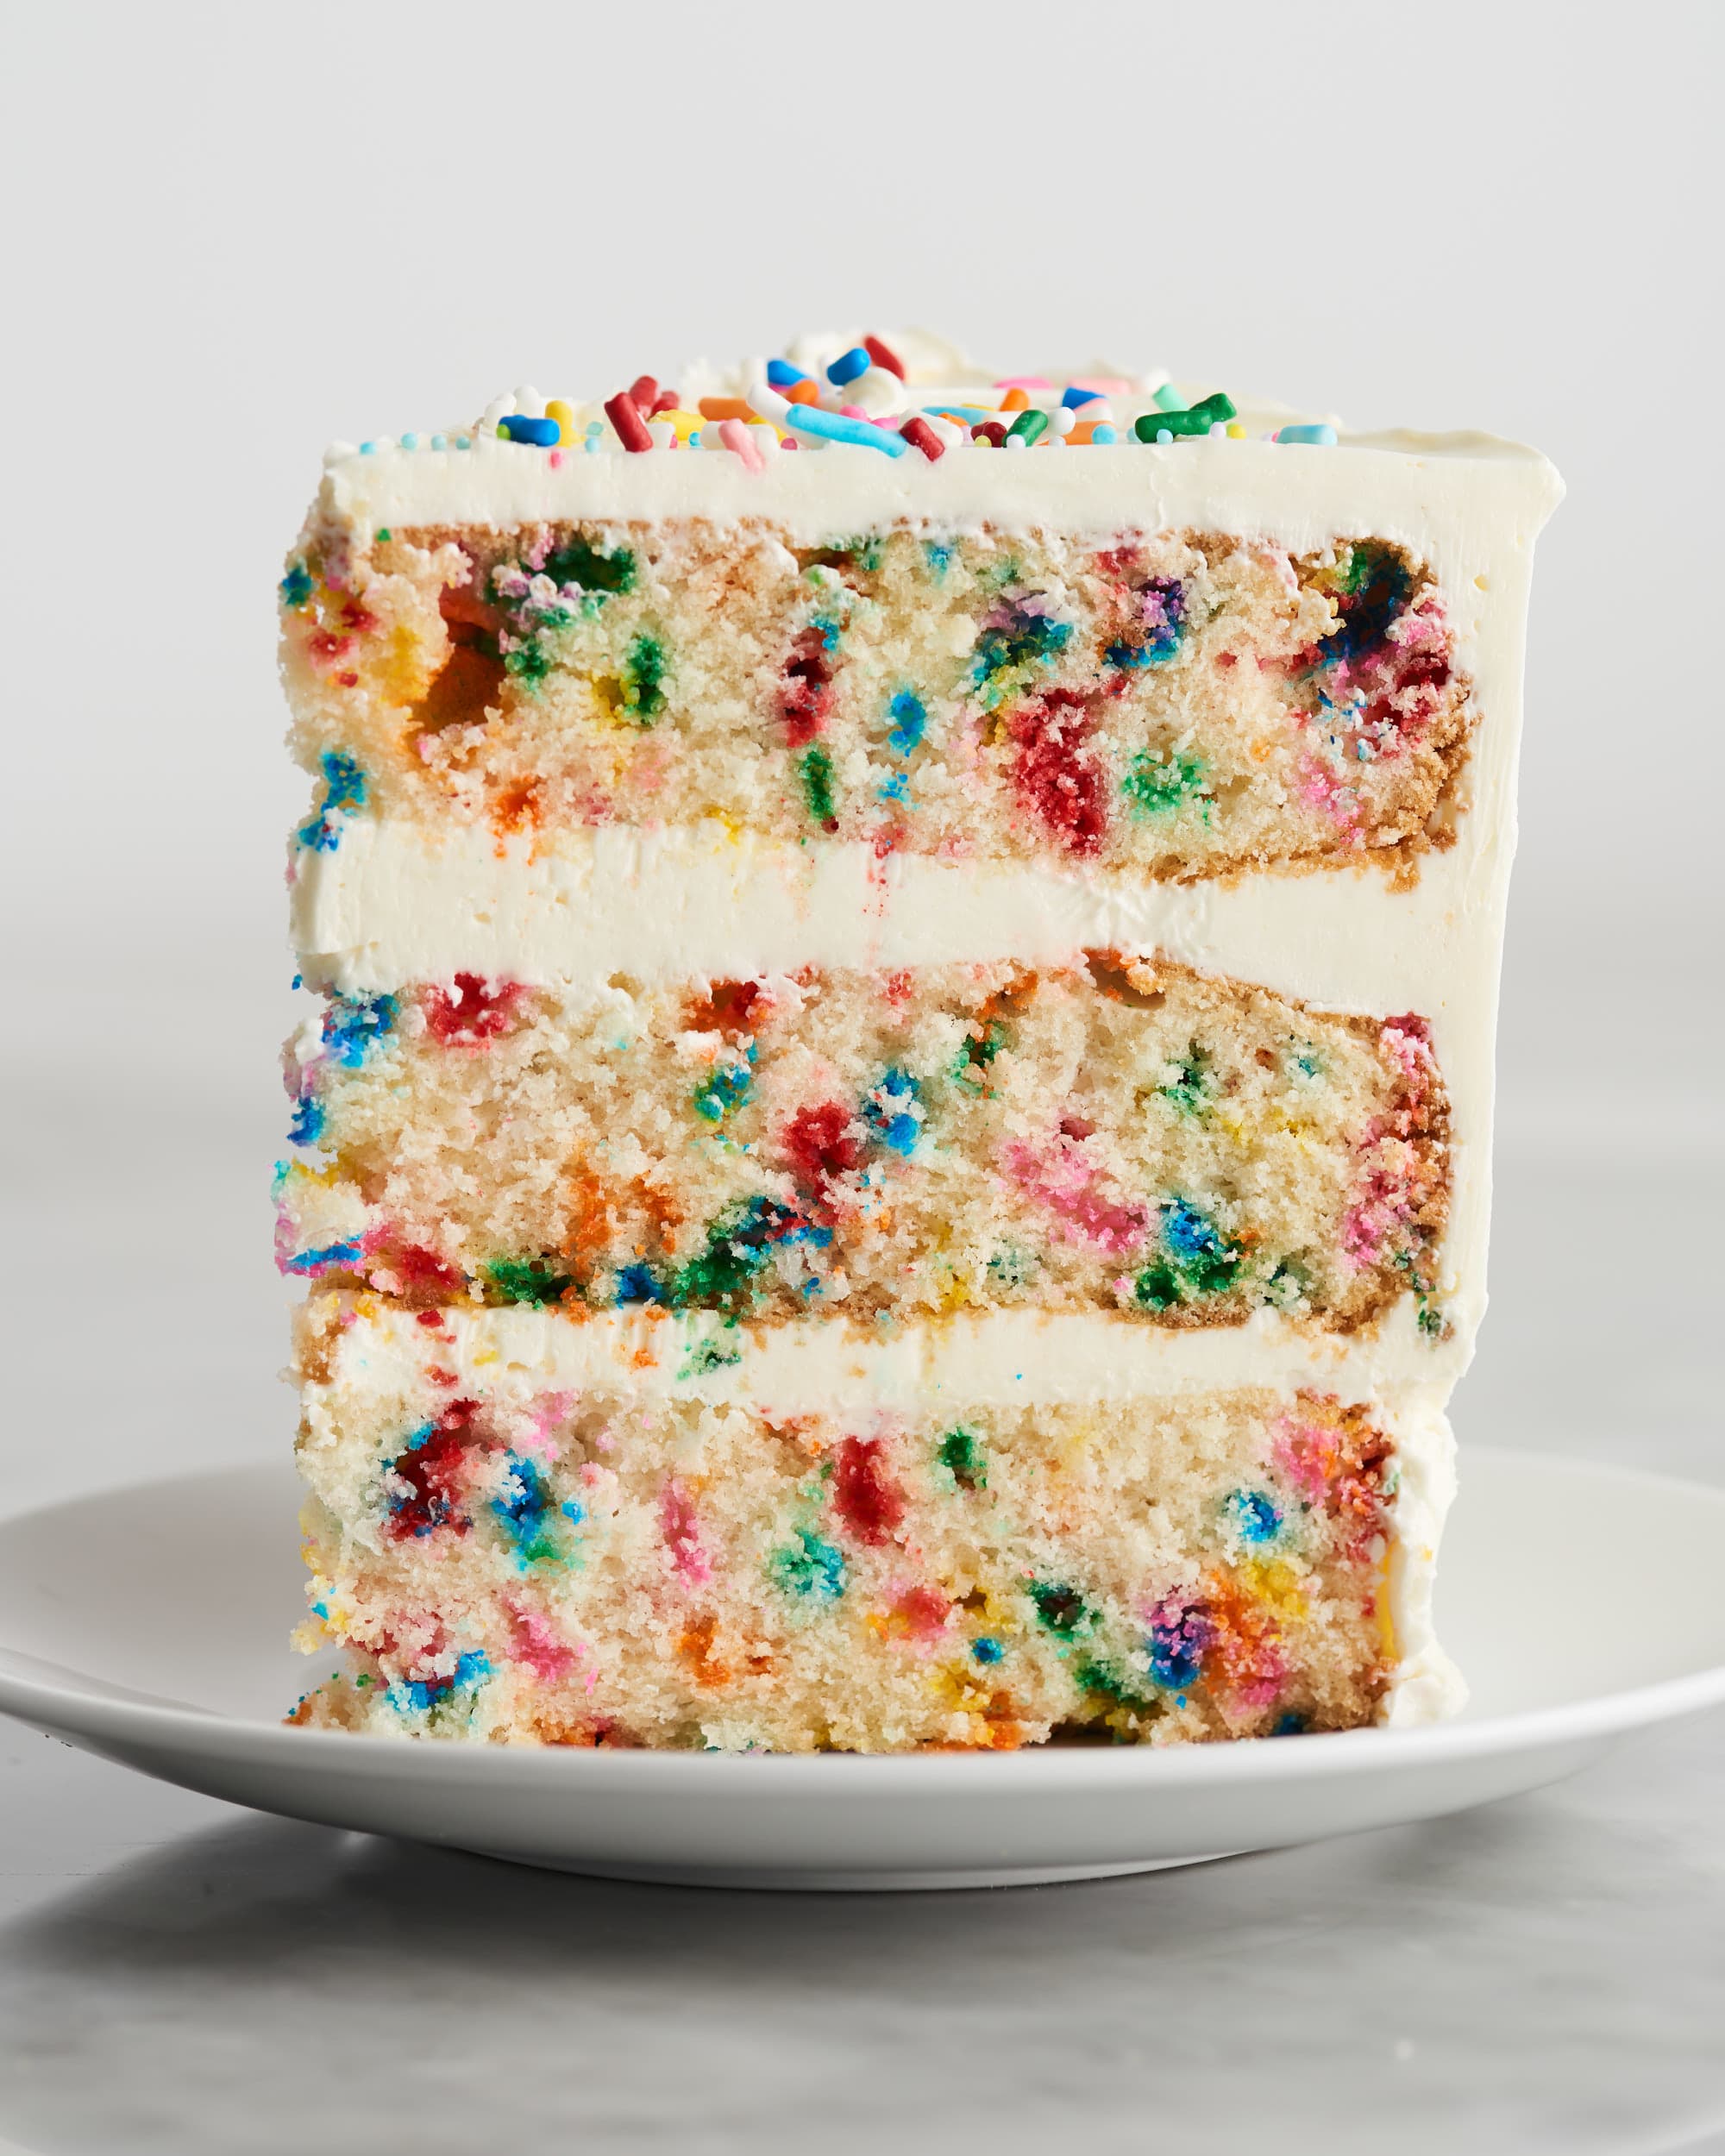 What Is Birthday Cake Flavor?